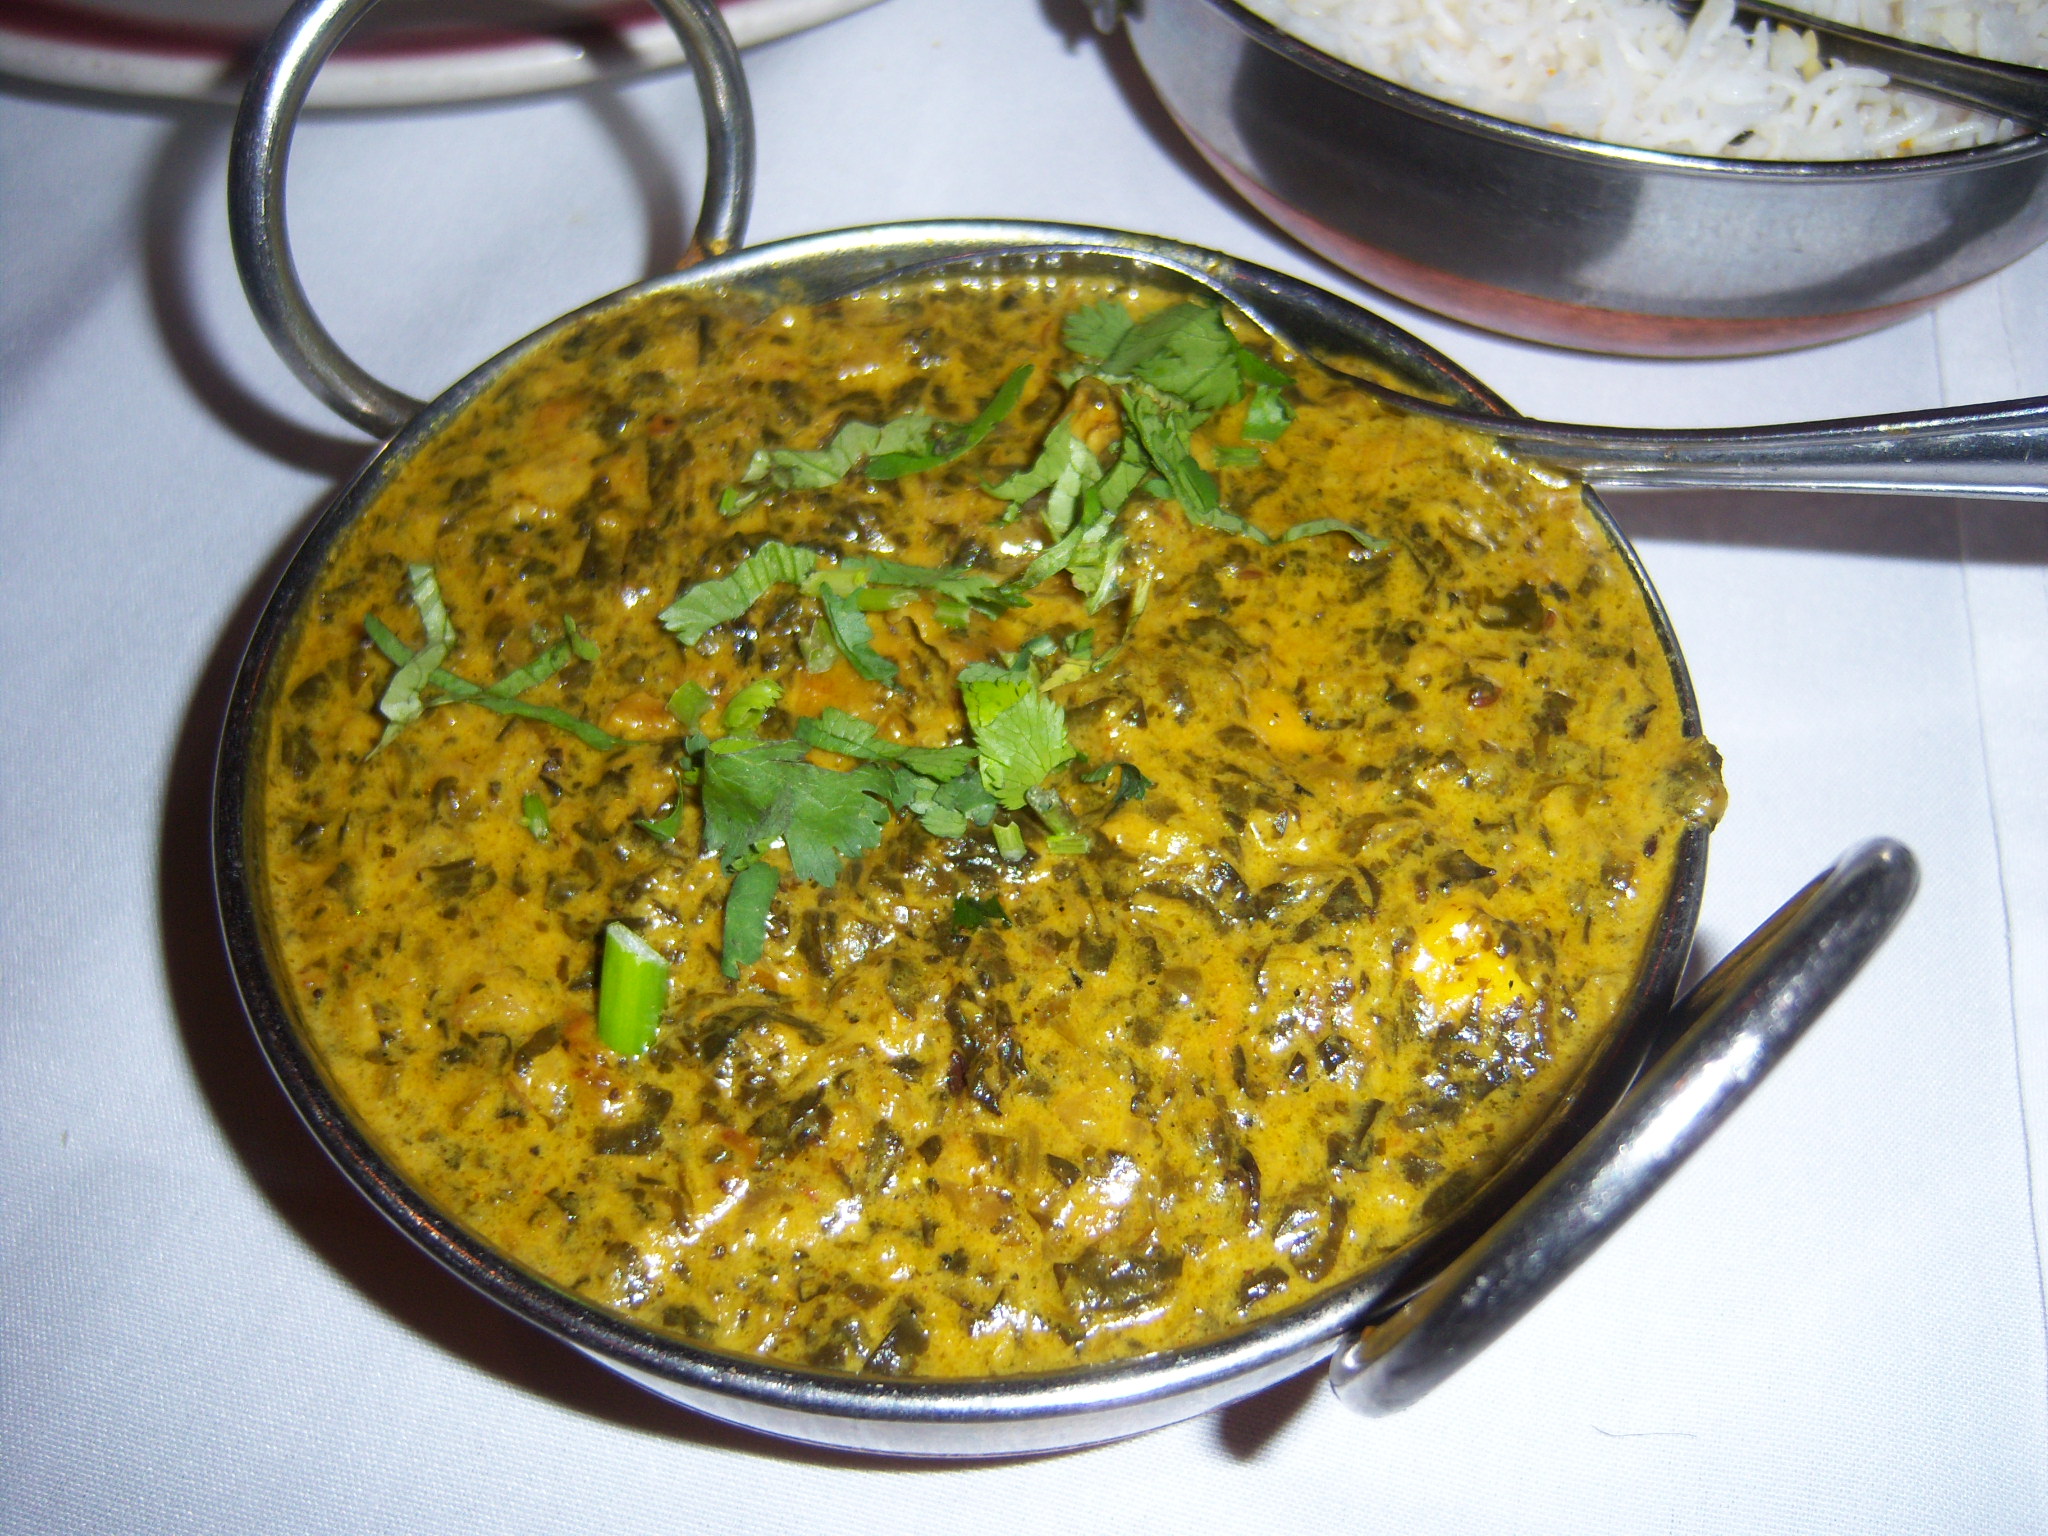 Saag Paneer at India Oven Restaurant